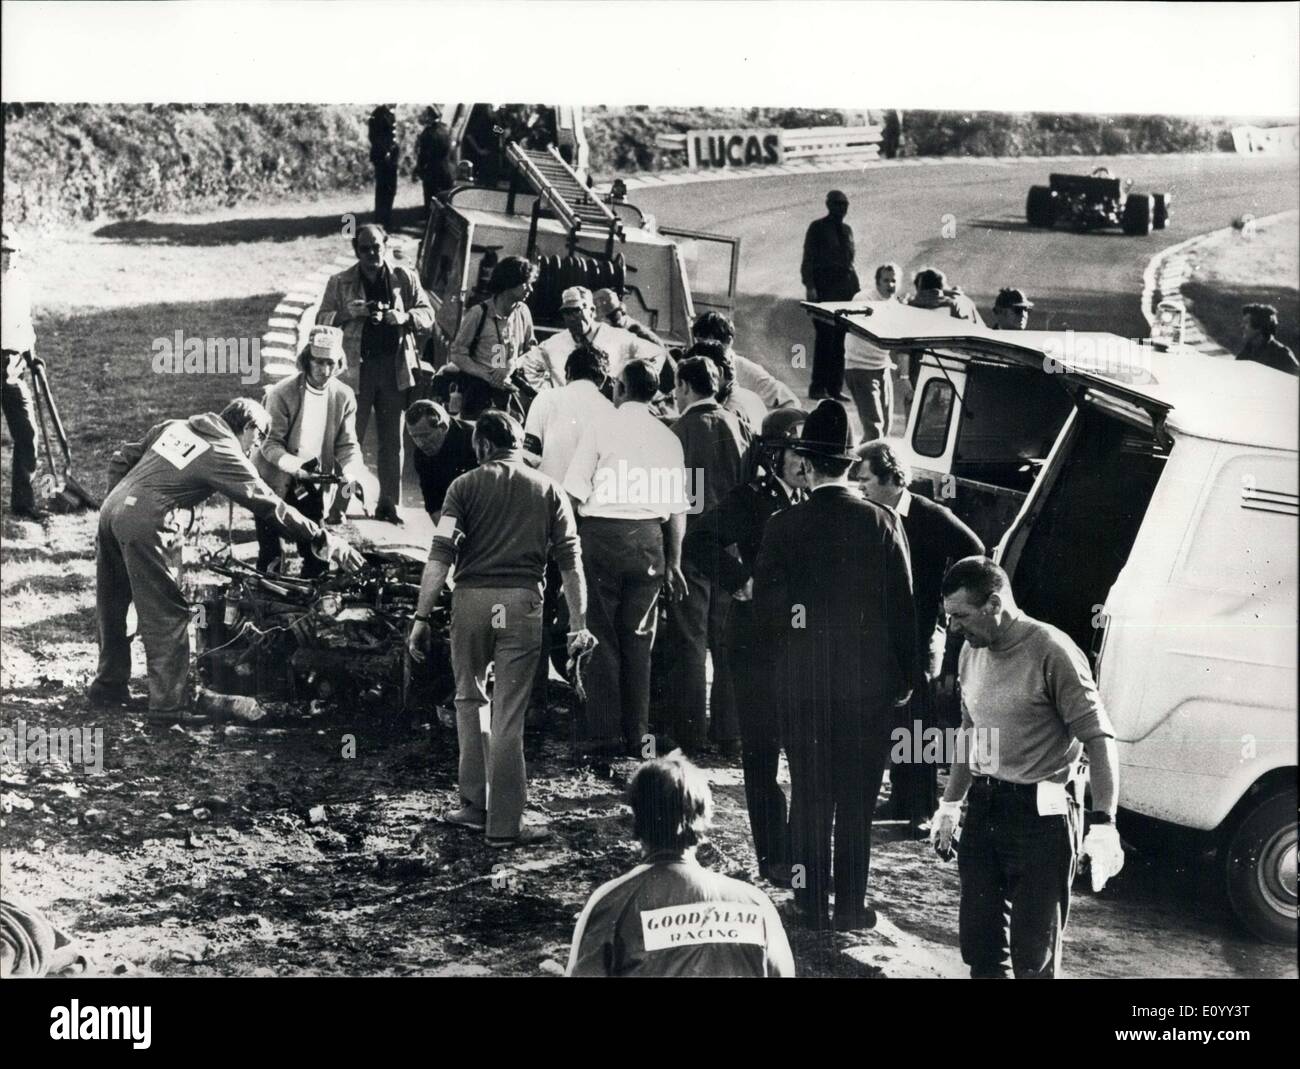 Jo Siffert killed at Brands Hatch on October 24, 1971.